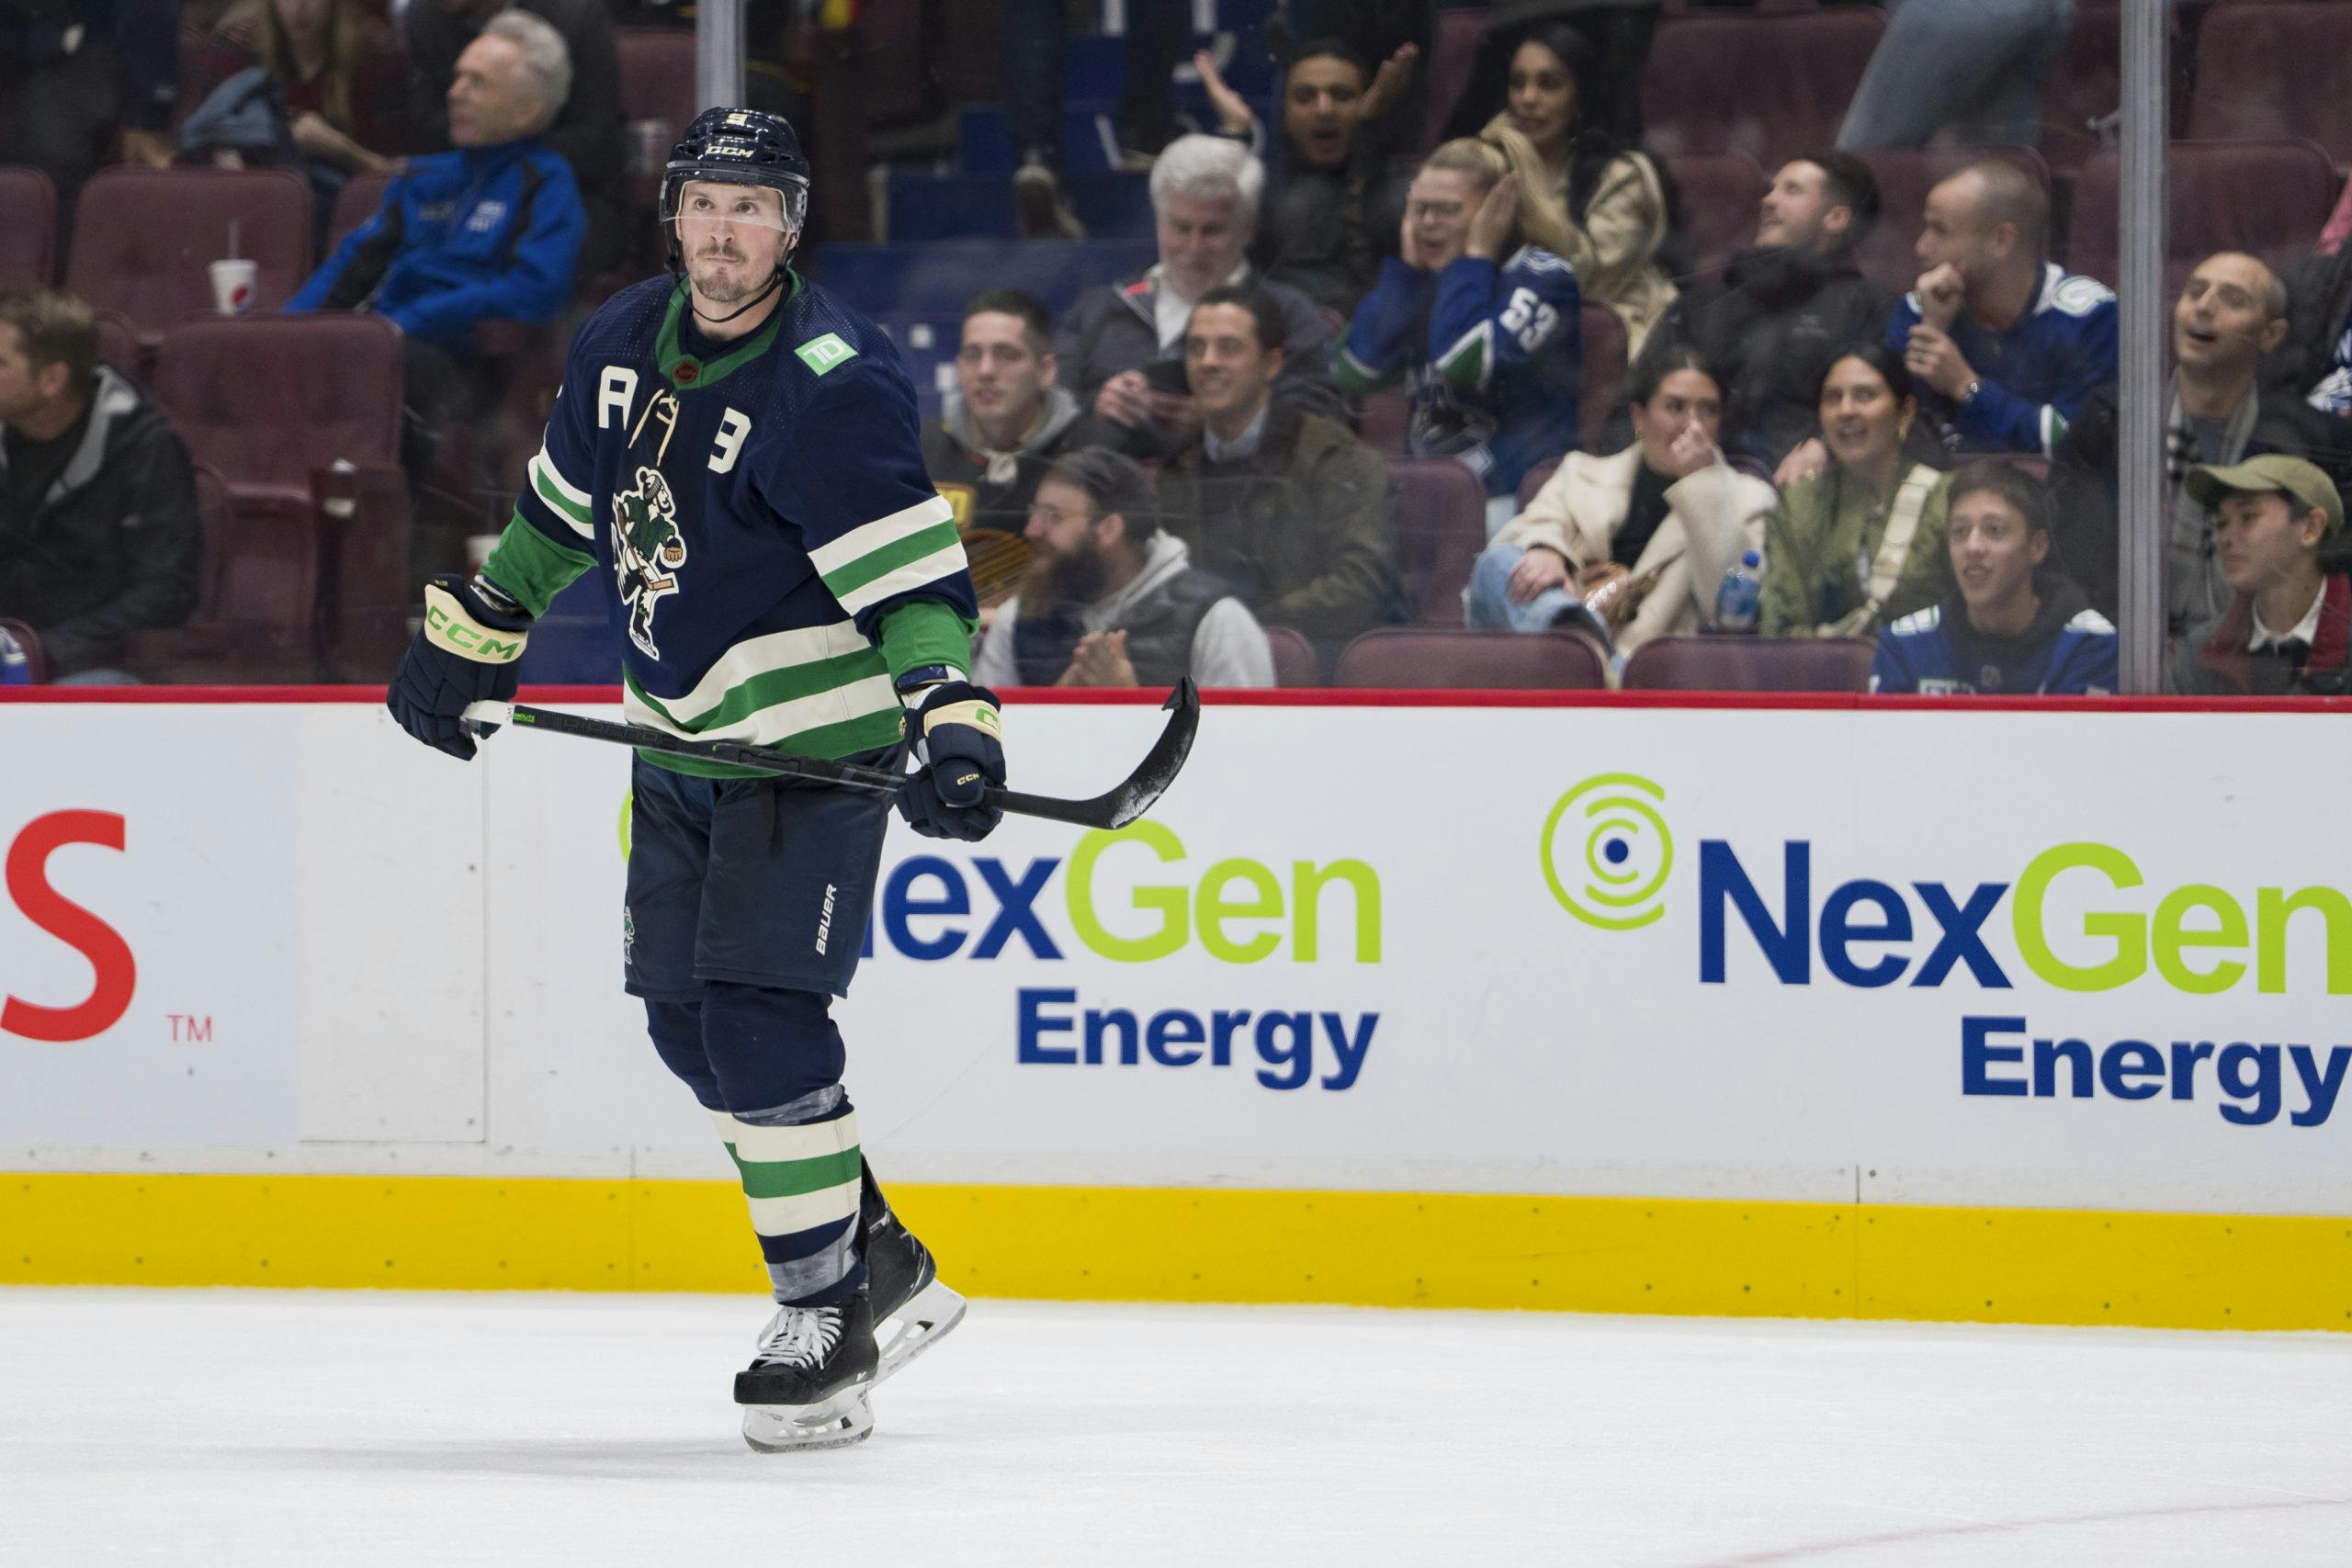 J.T. Miller has forged a hard-nosed identity for the Canucks' top